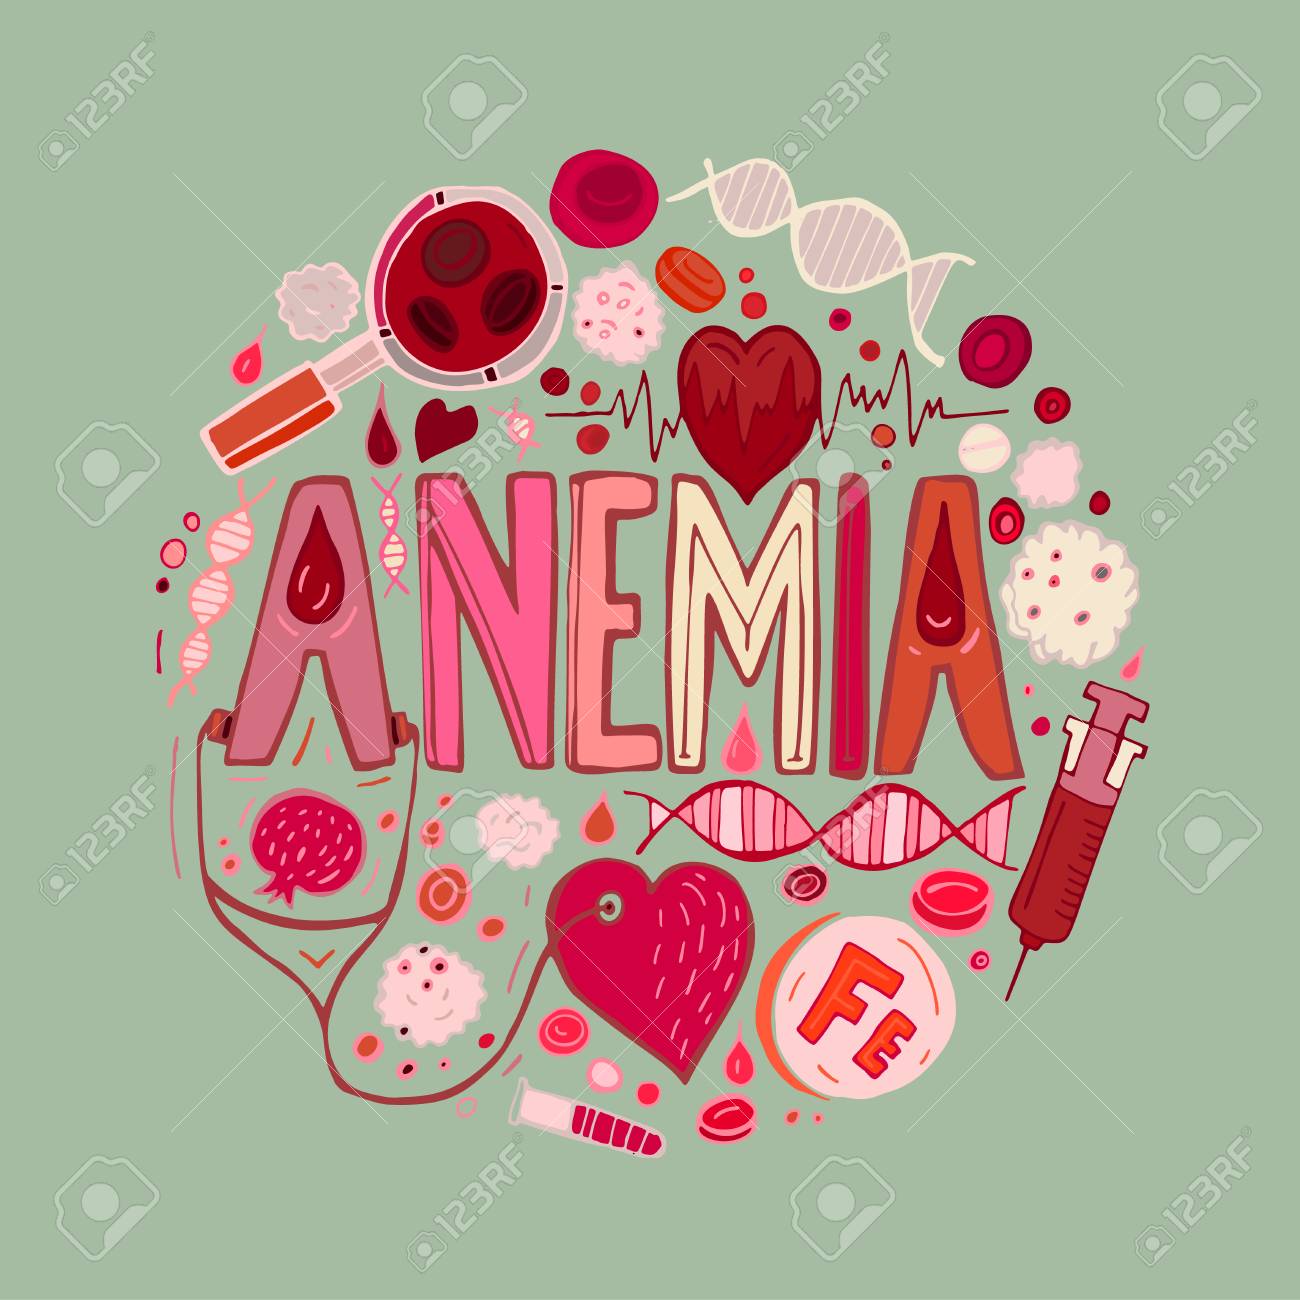 Creative Anemia Background With Lettering In Doodle Style Hand